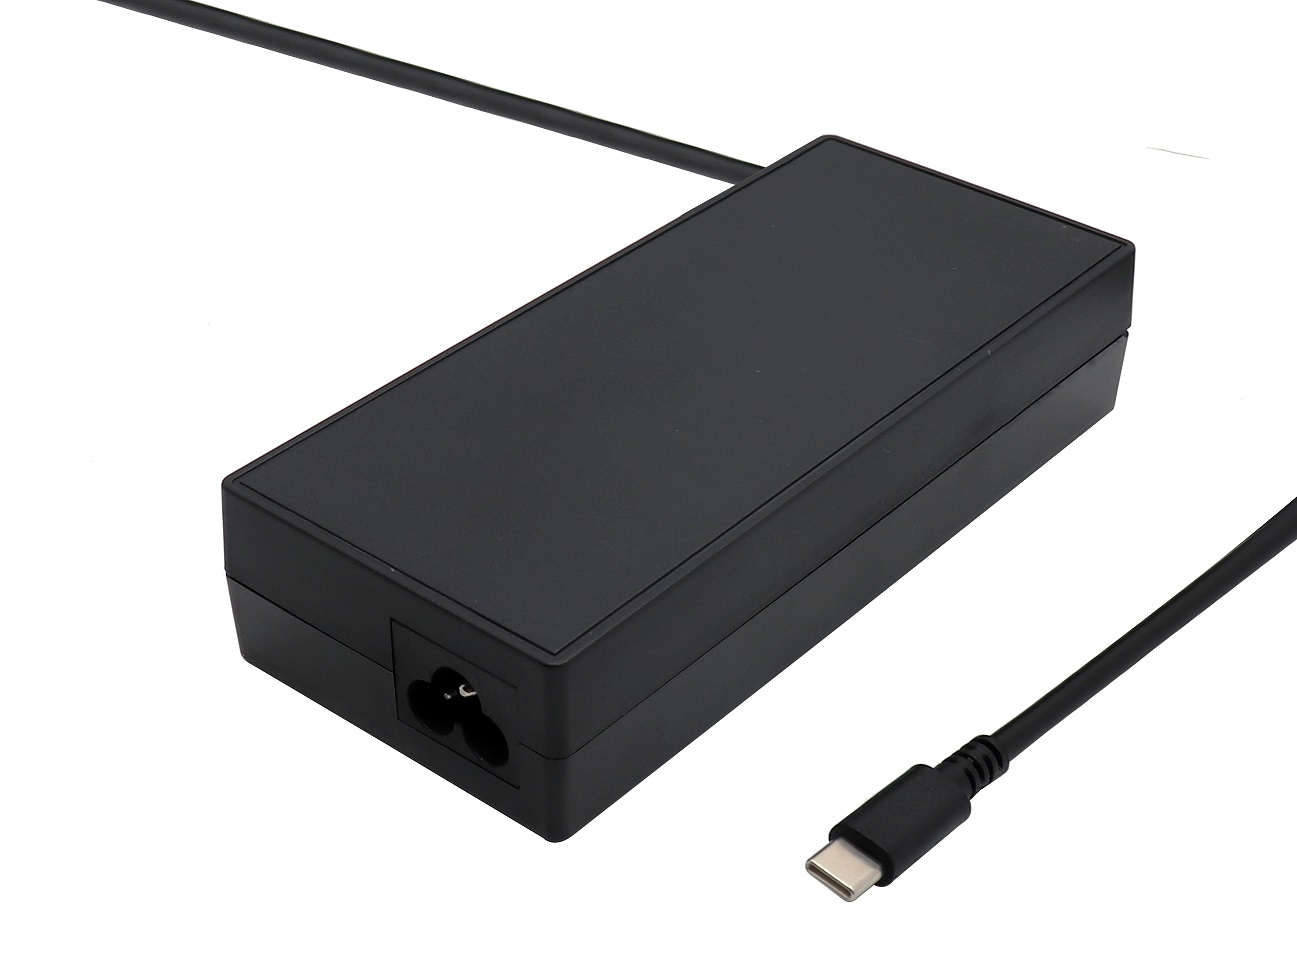 Origin Storage 100W USB-C AC Adapter with 8 output voltages for all USB-C devices up to 100W - UK Connections Alternative Image